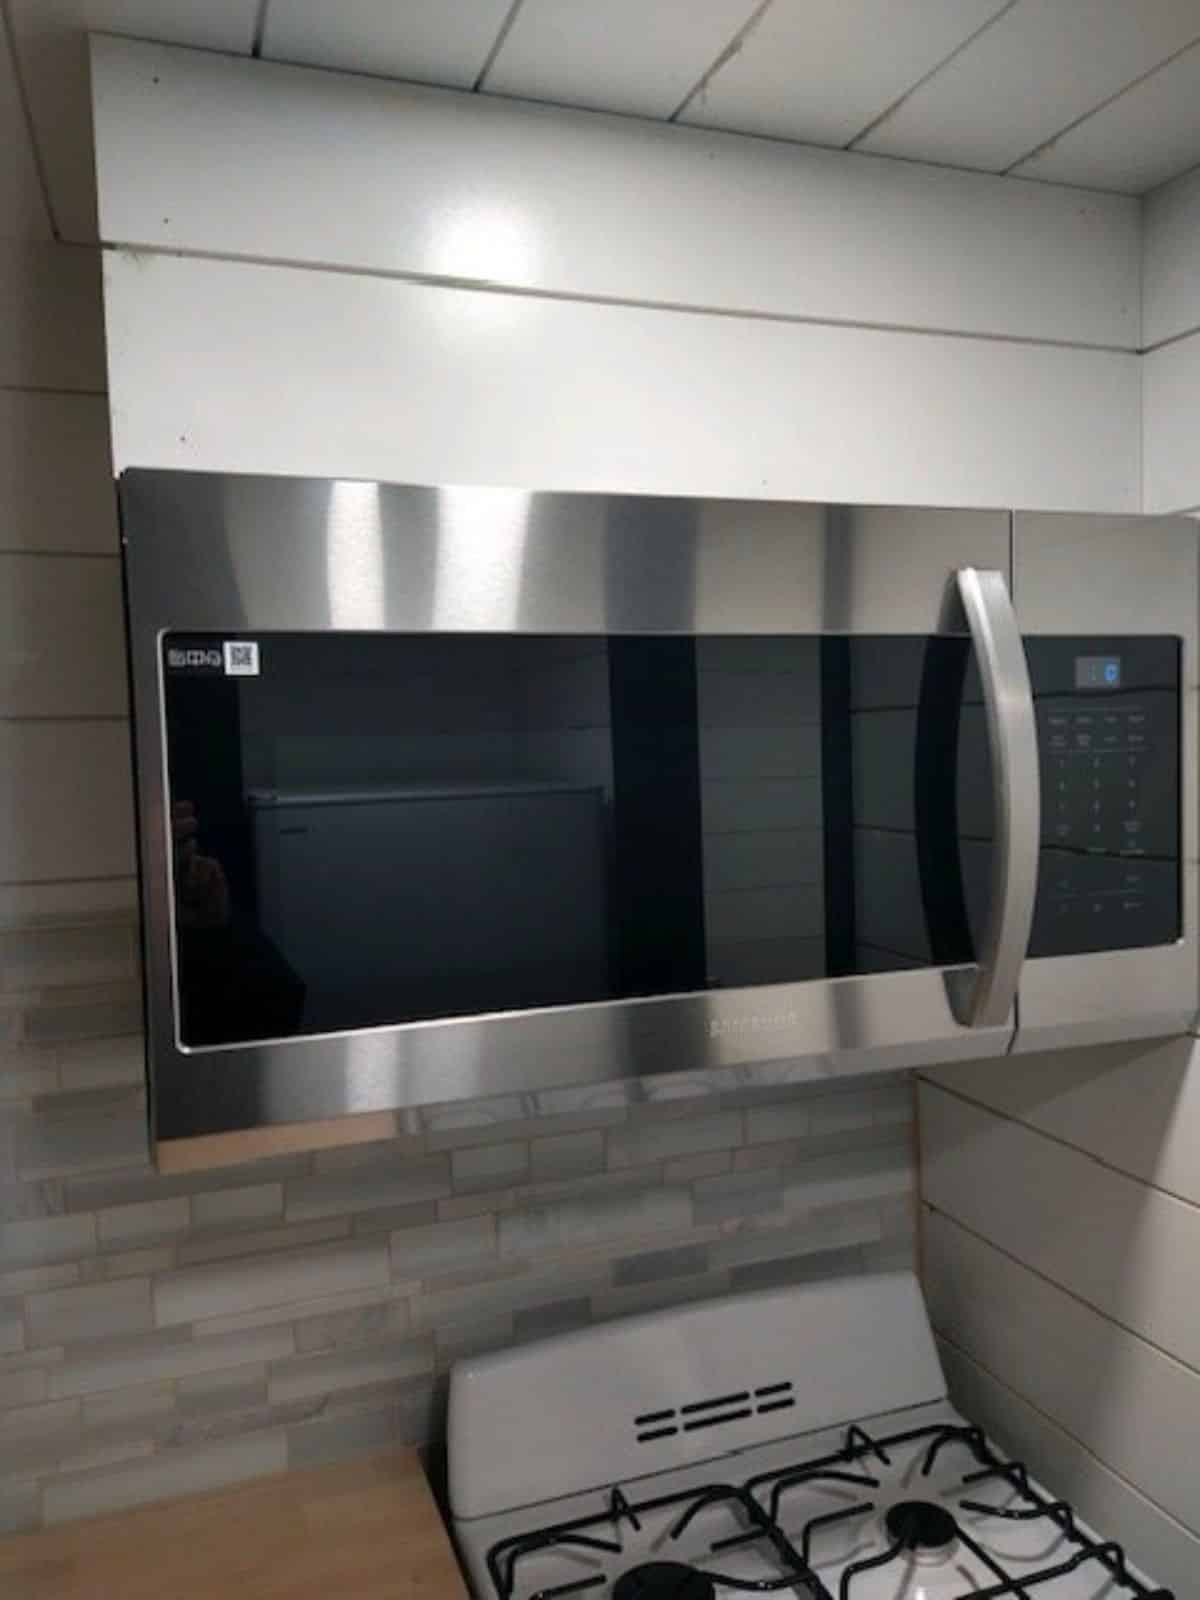 Microwave oven in kitchen